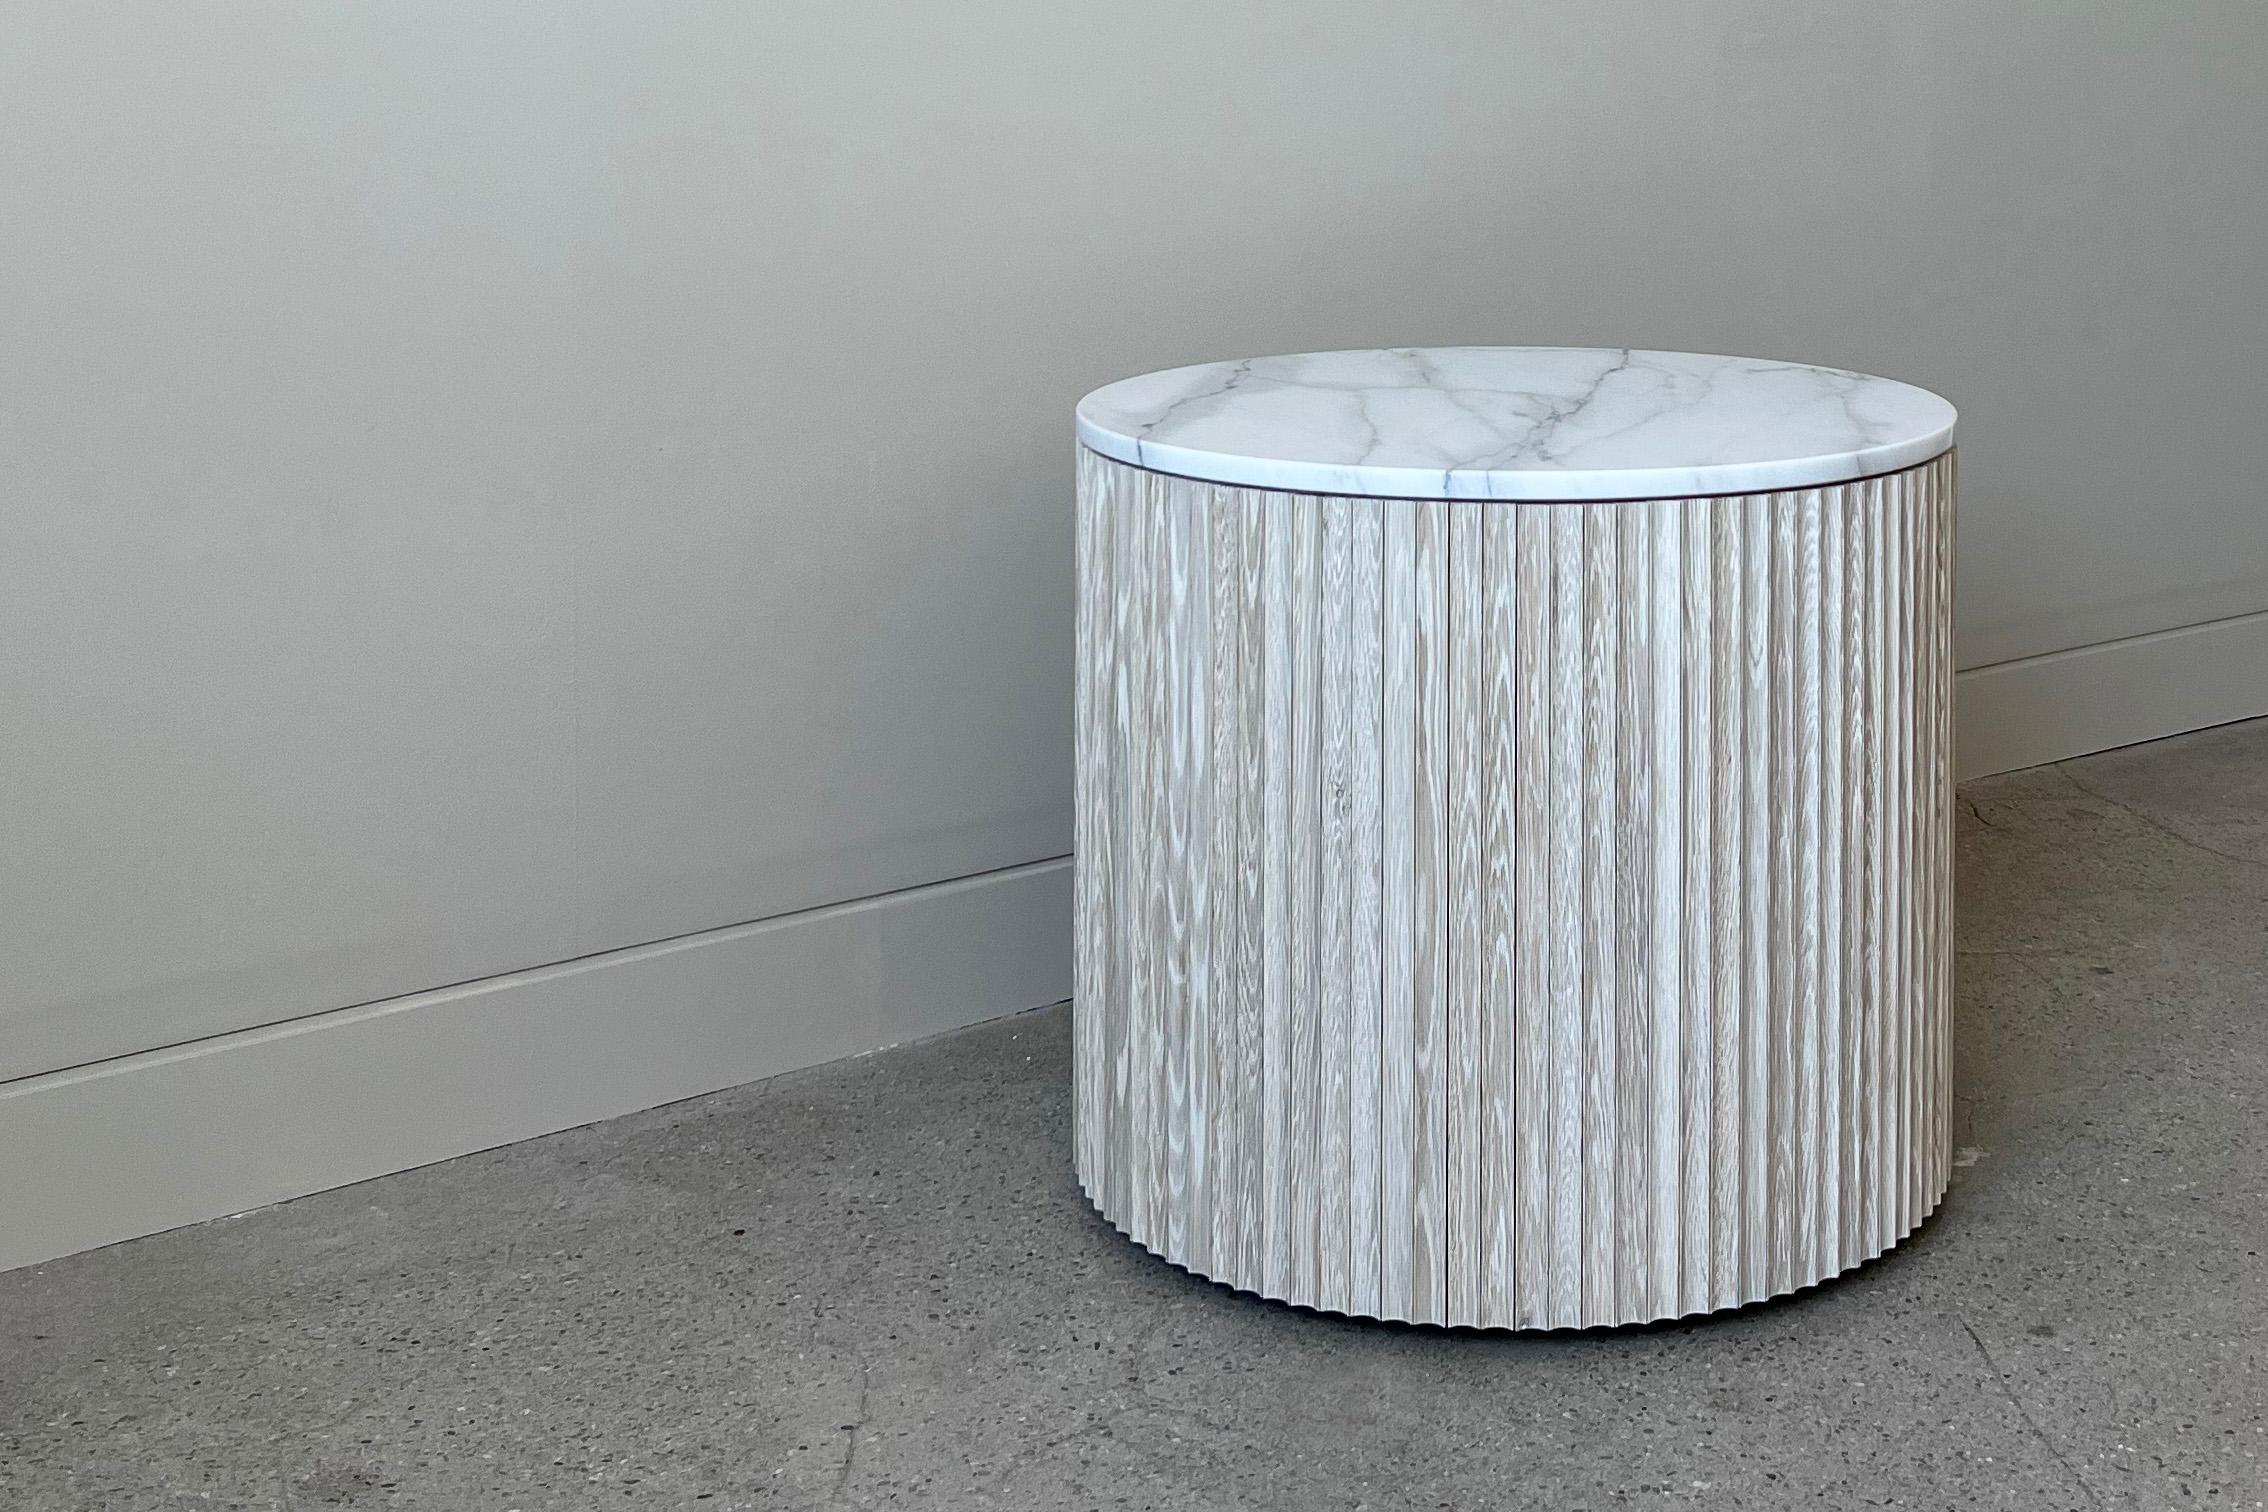 American Pilar Round Side Table / Bleached Oak Wood + Carrara Marble Top by INDO- For Sale